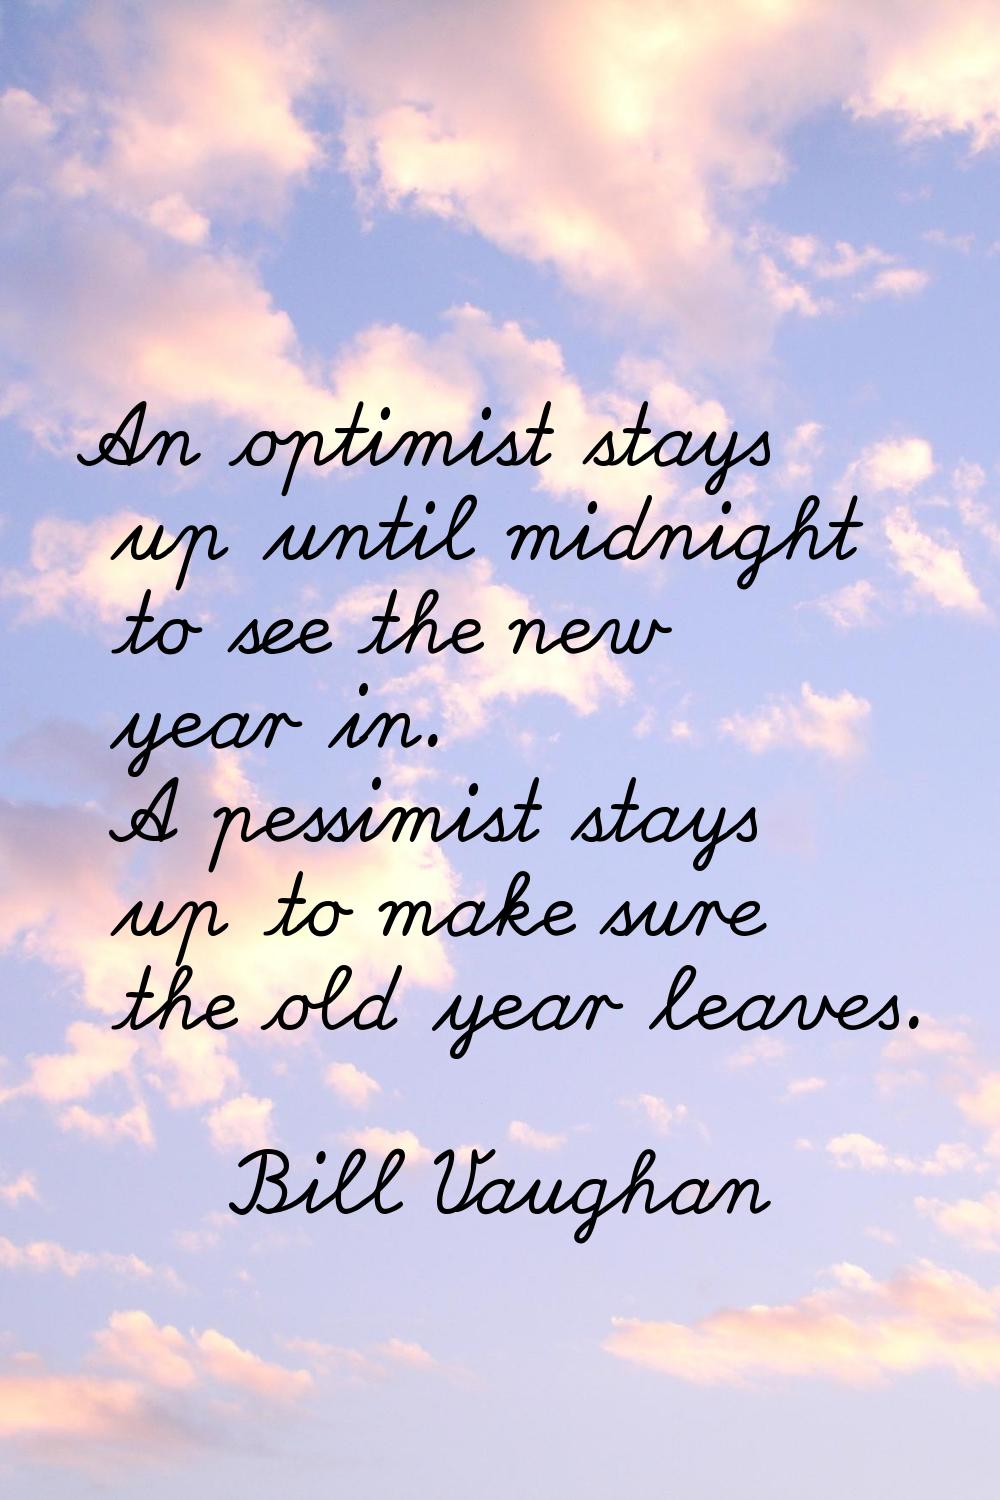 An optimist stays up until midnight to see the new year in. A pessimist stays up to make sure the o